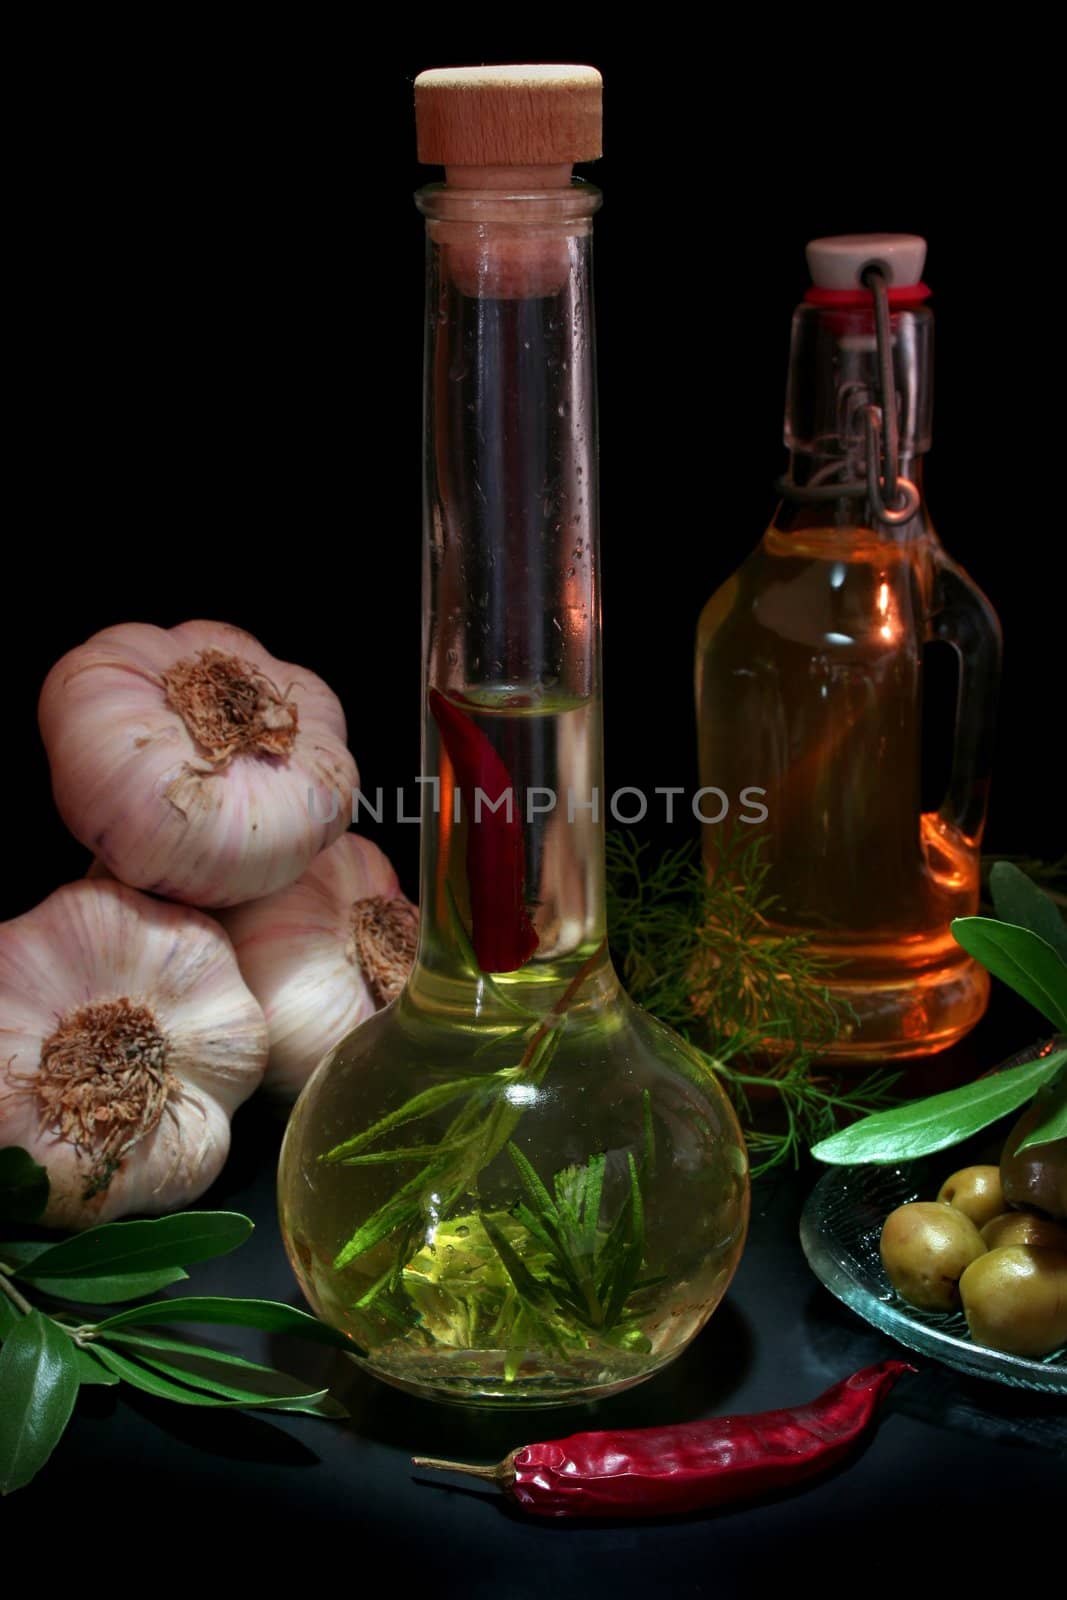 Herbal Oil with olive branch and fresh ingredients